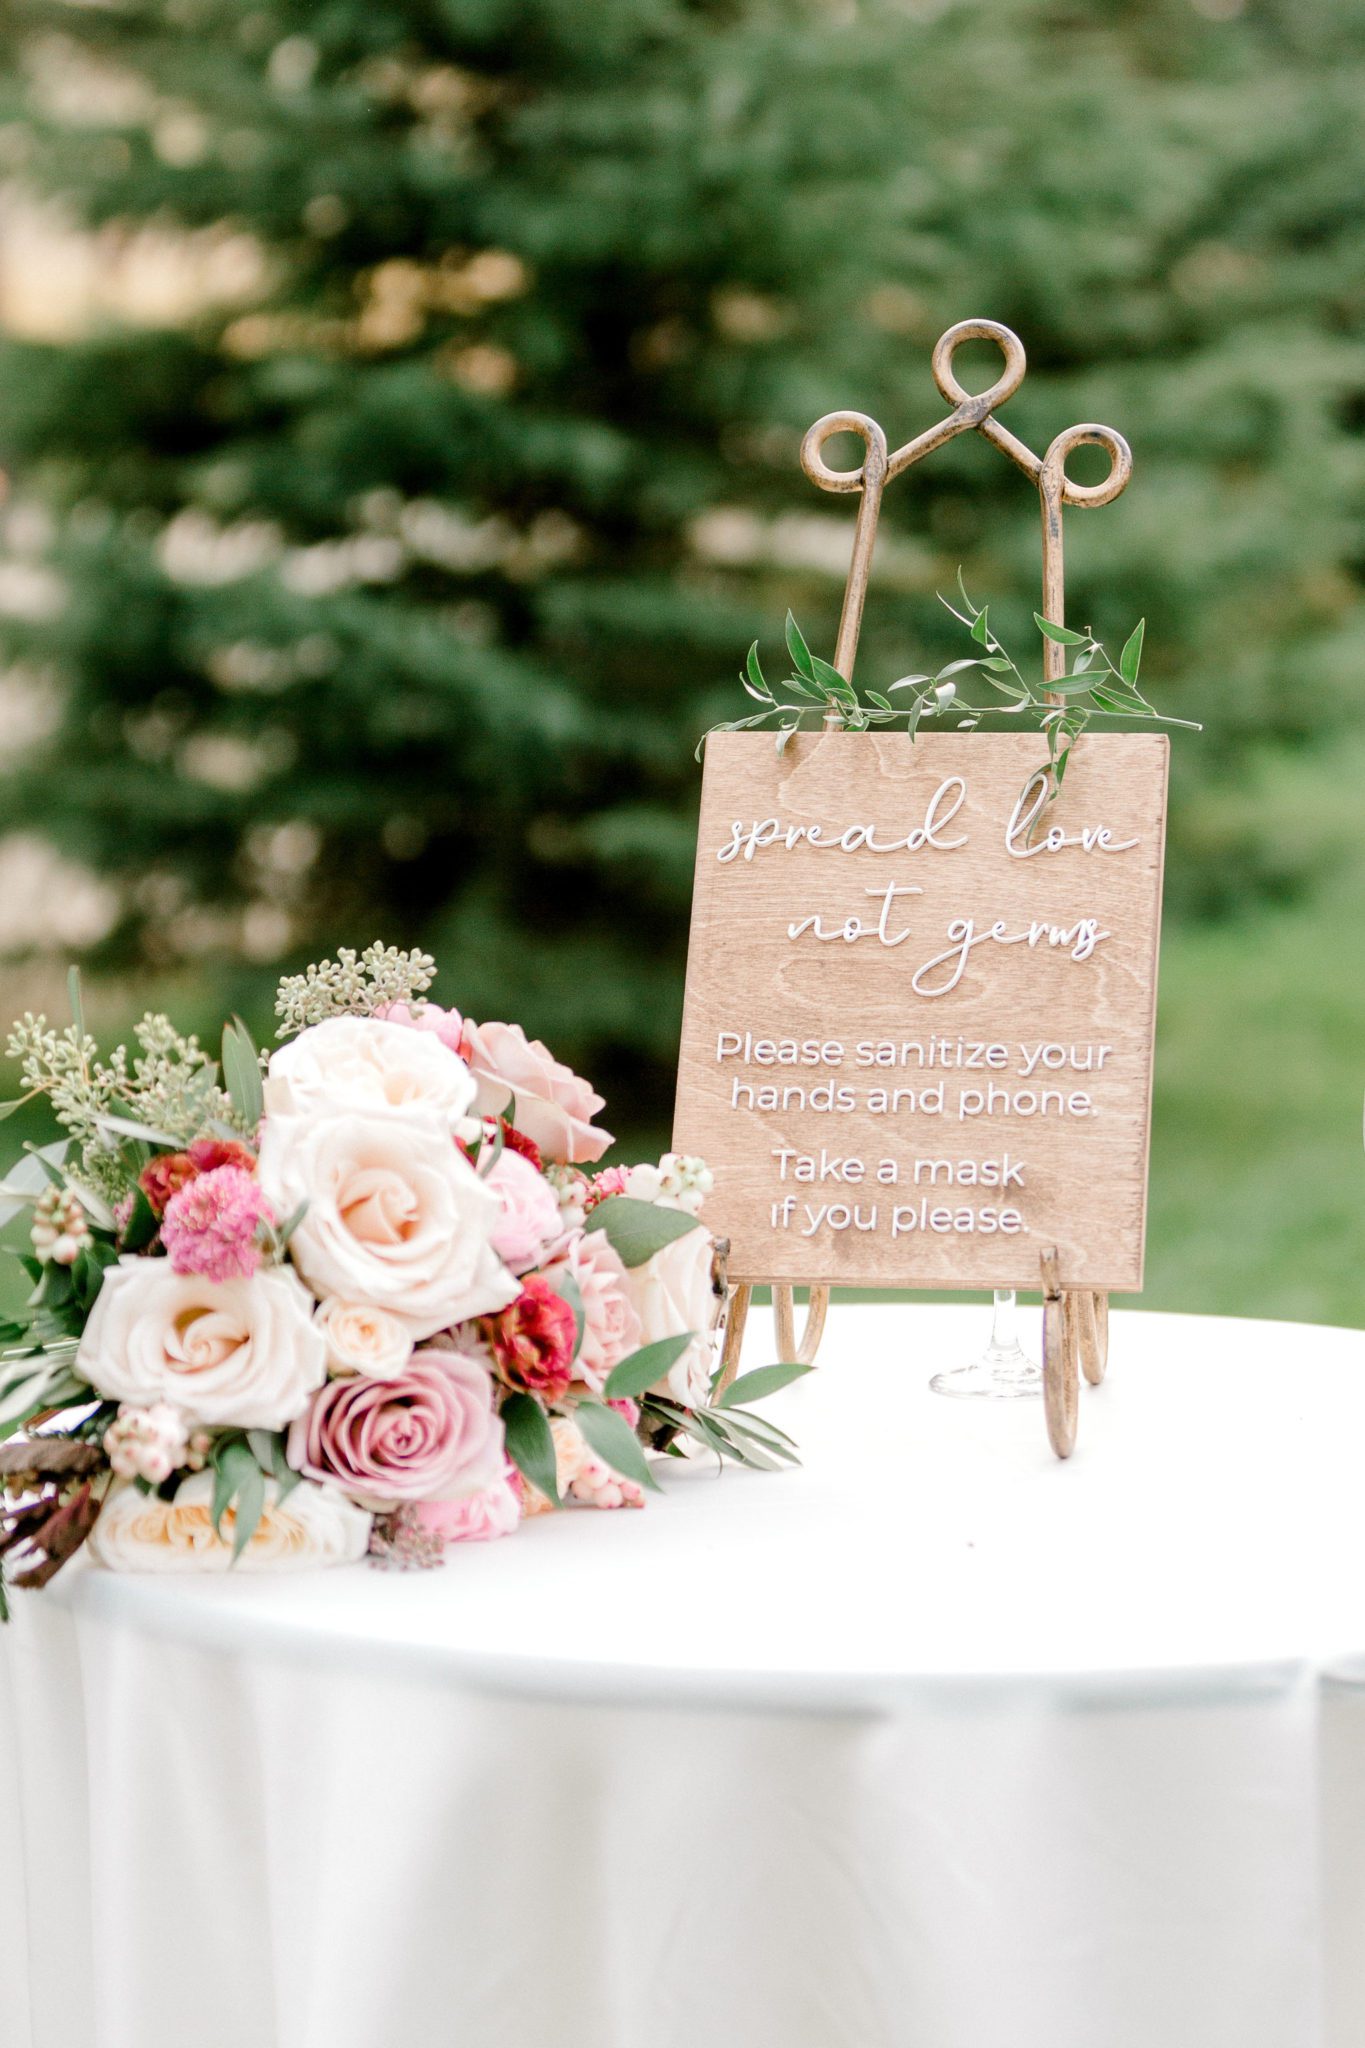 Covid-19 wedding signage inspiration with lavish floral details and romantic script